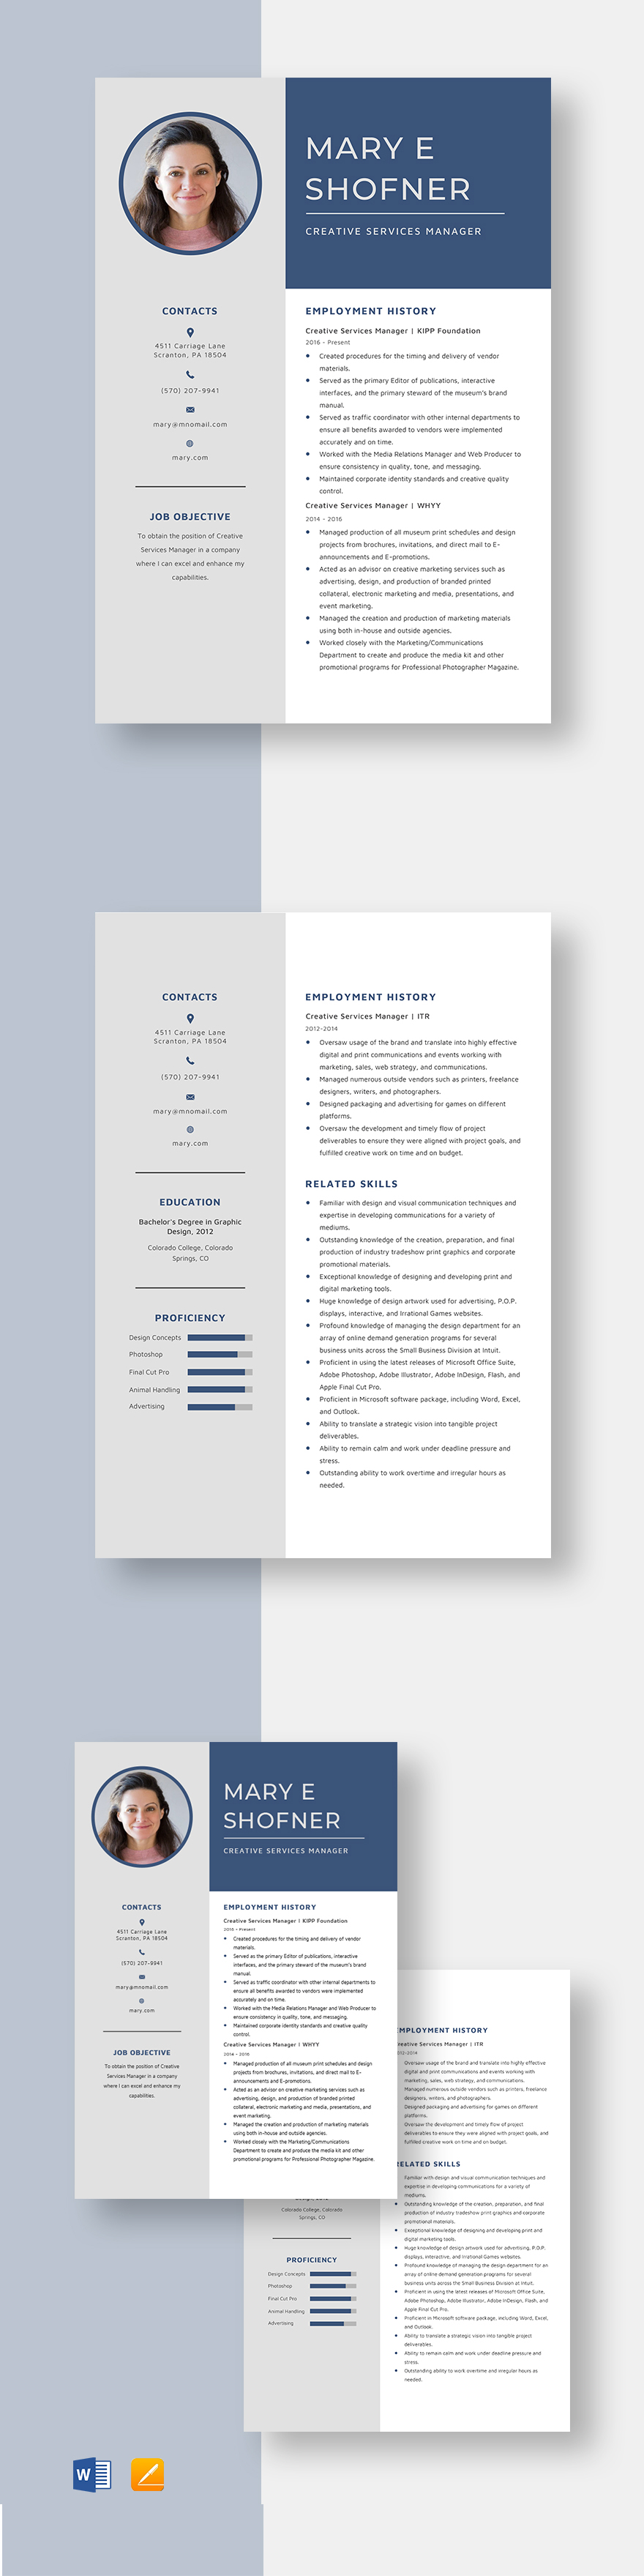 Free Creative Services Manager Resume Template